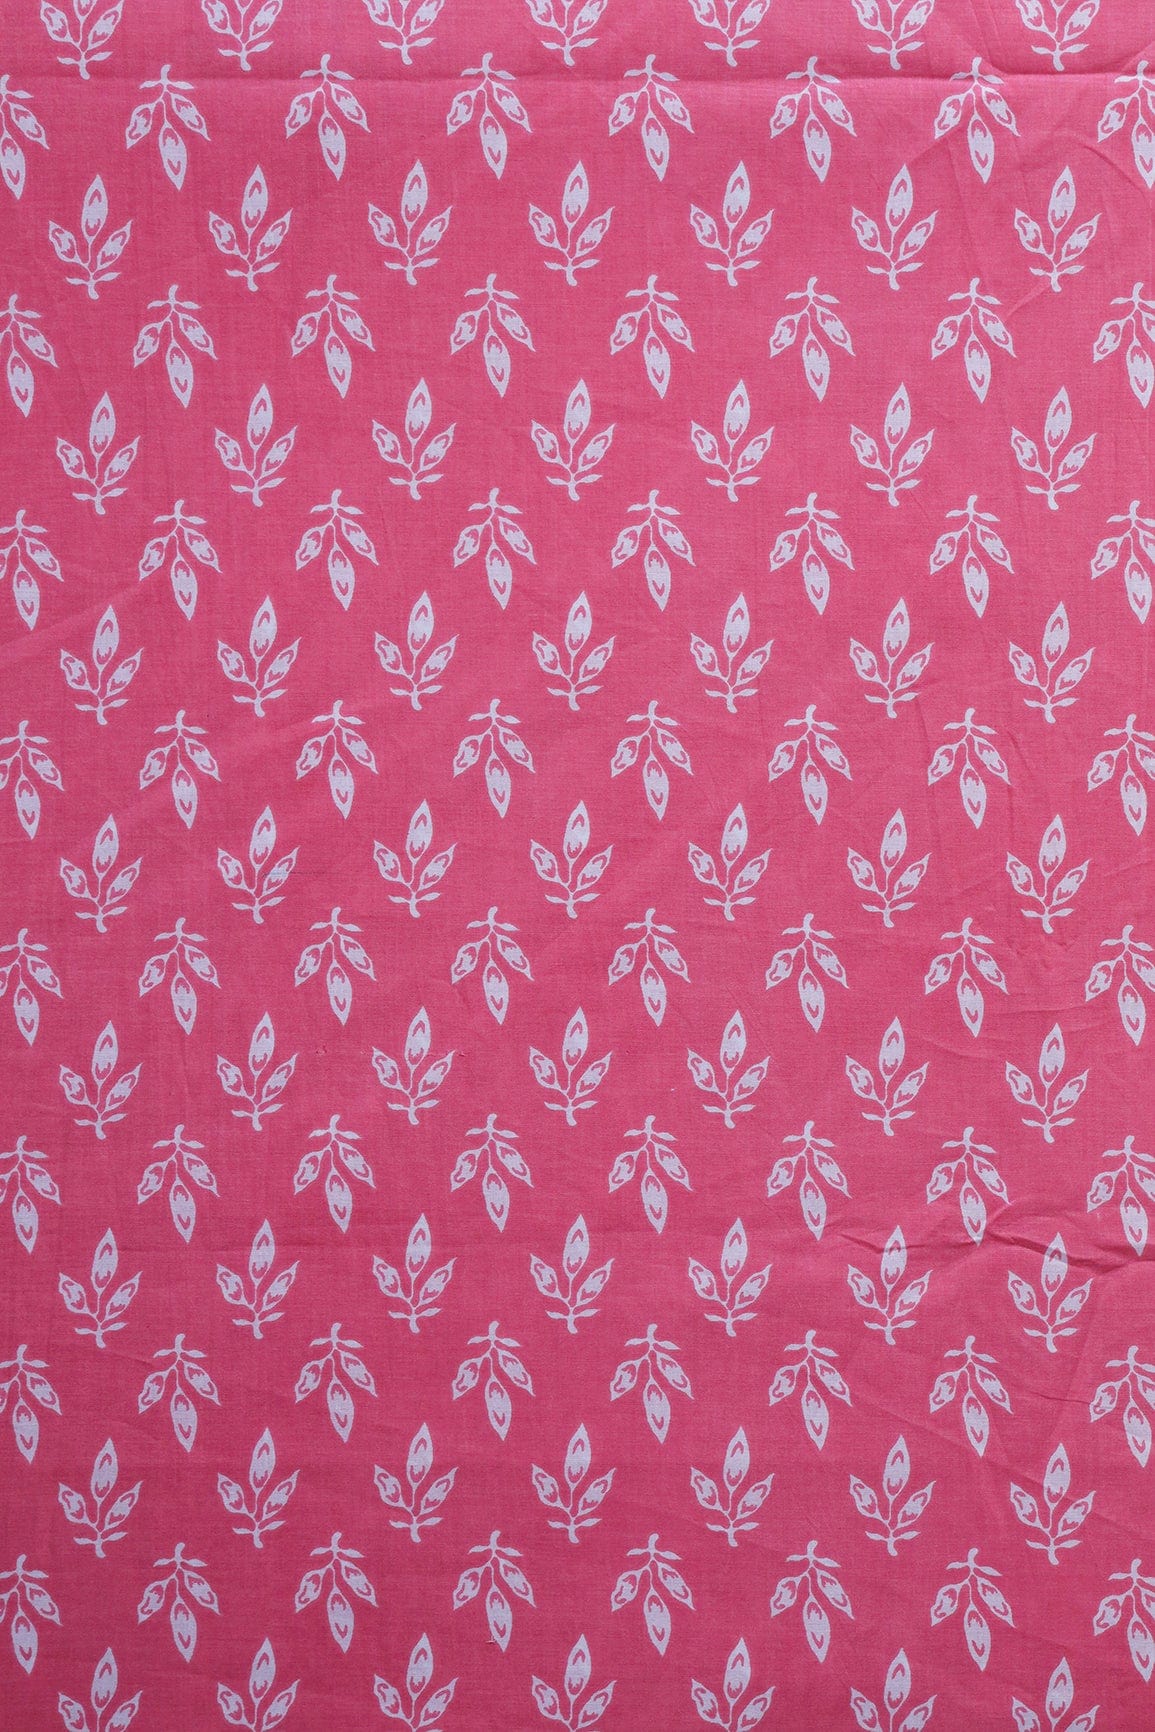 doeraa Prints White Leafy Print On Pink Pure Mul Cotton Fabric